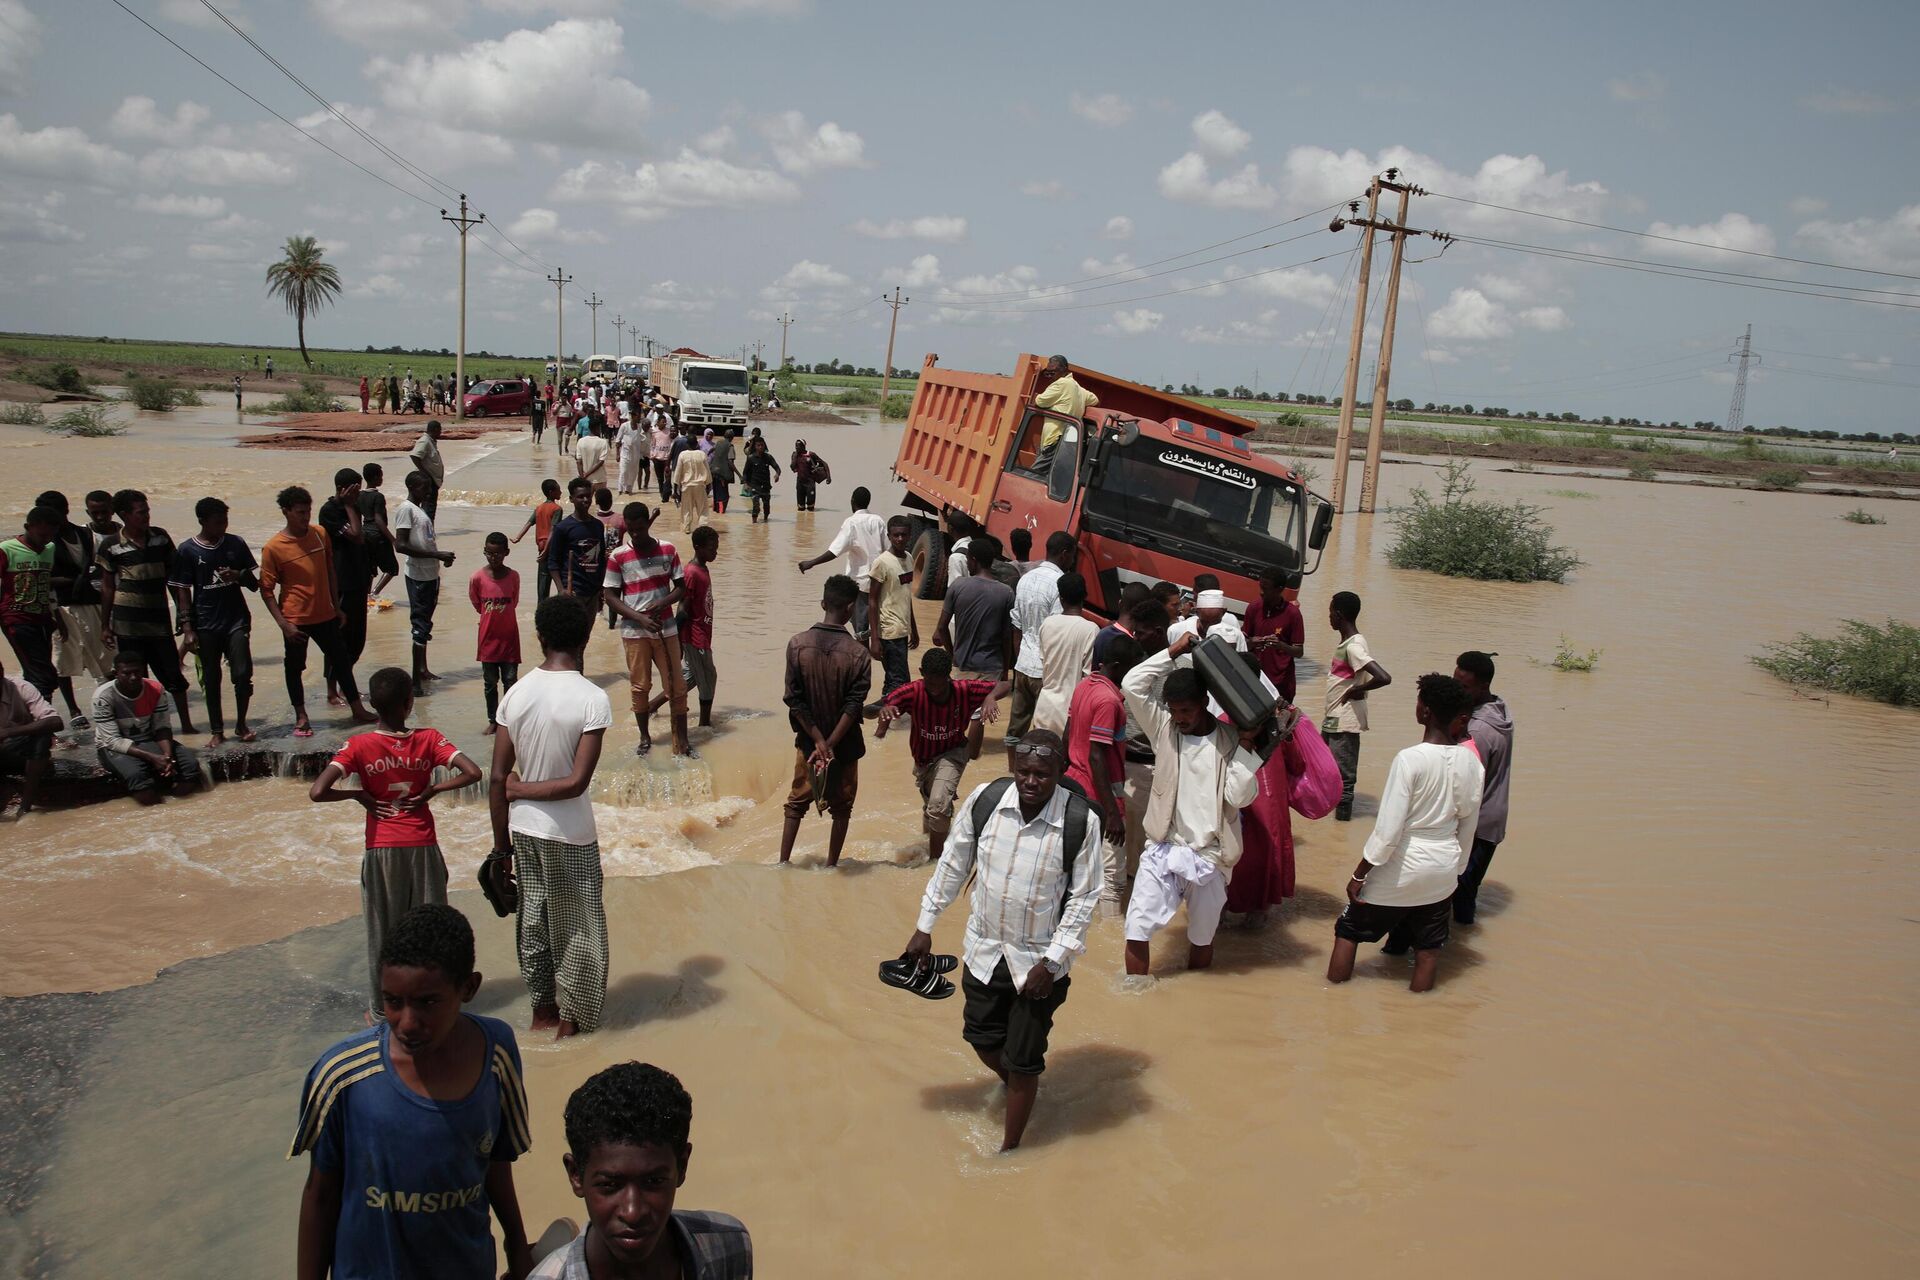 People walk on a flooded road after a heavy rainfall in the village of Aboud in the El-Manaqil district of the Al-Jazirah province, southeast of Khartoum, Sudan, Monday, August 22 2022. - Sputnik International, 1920, 20.09.2022